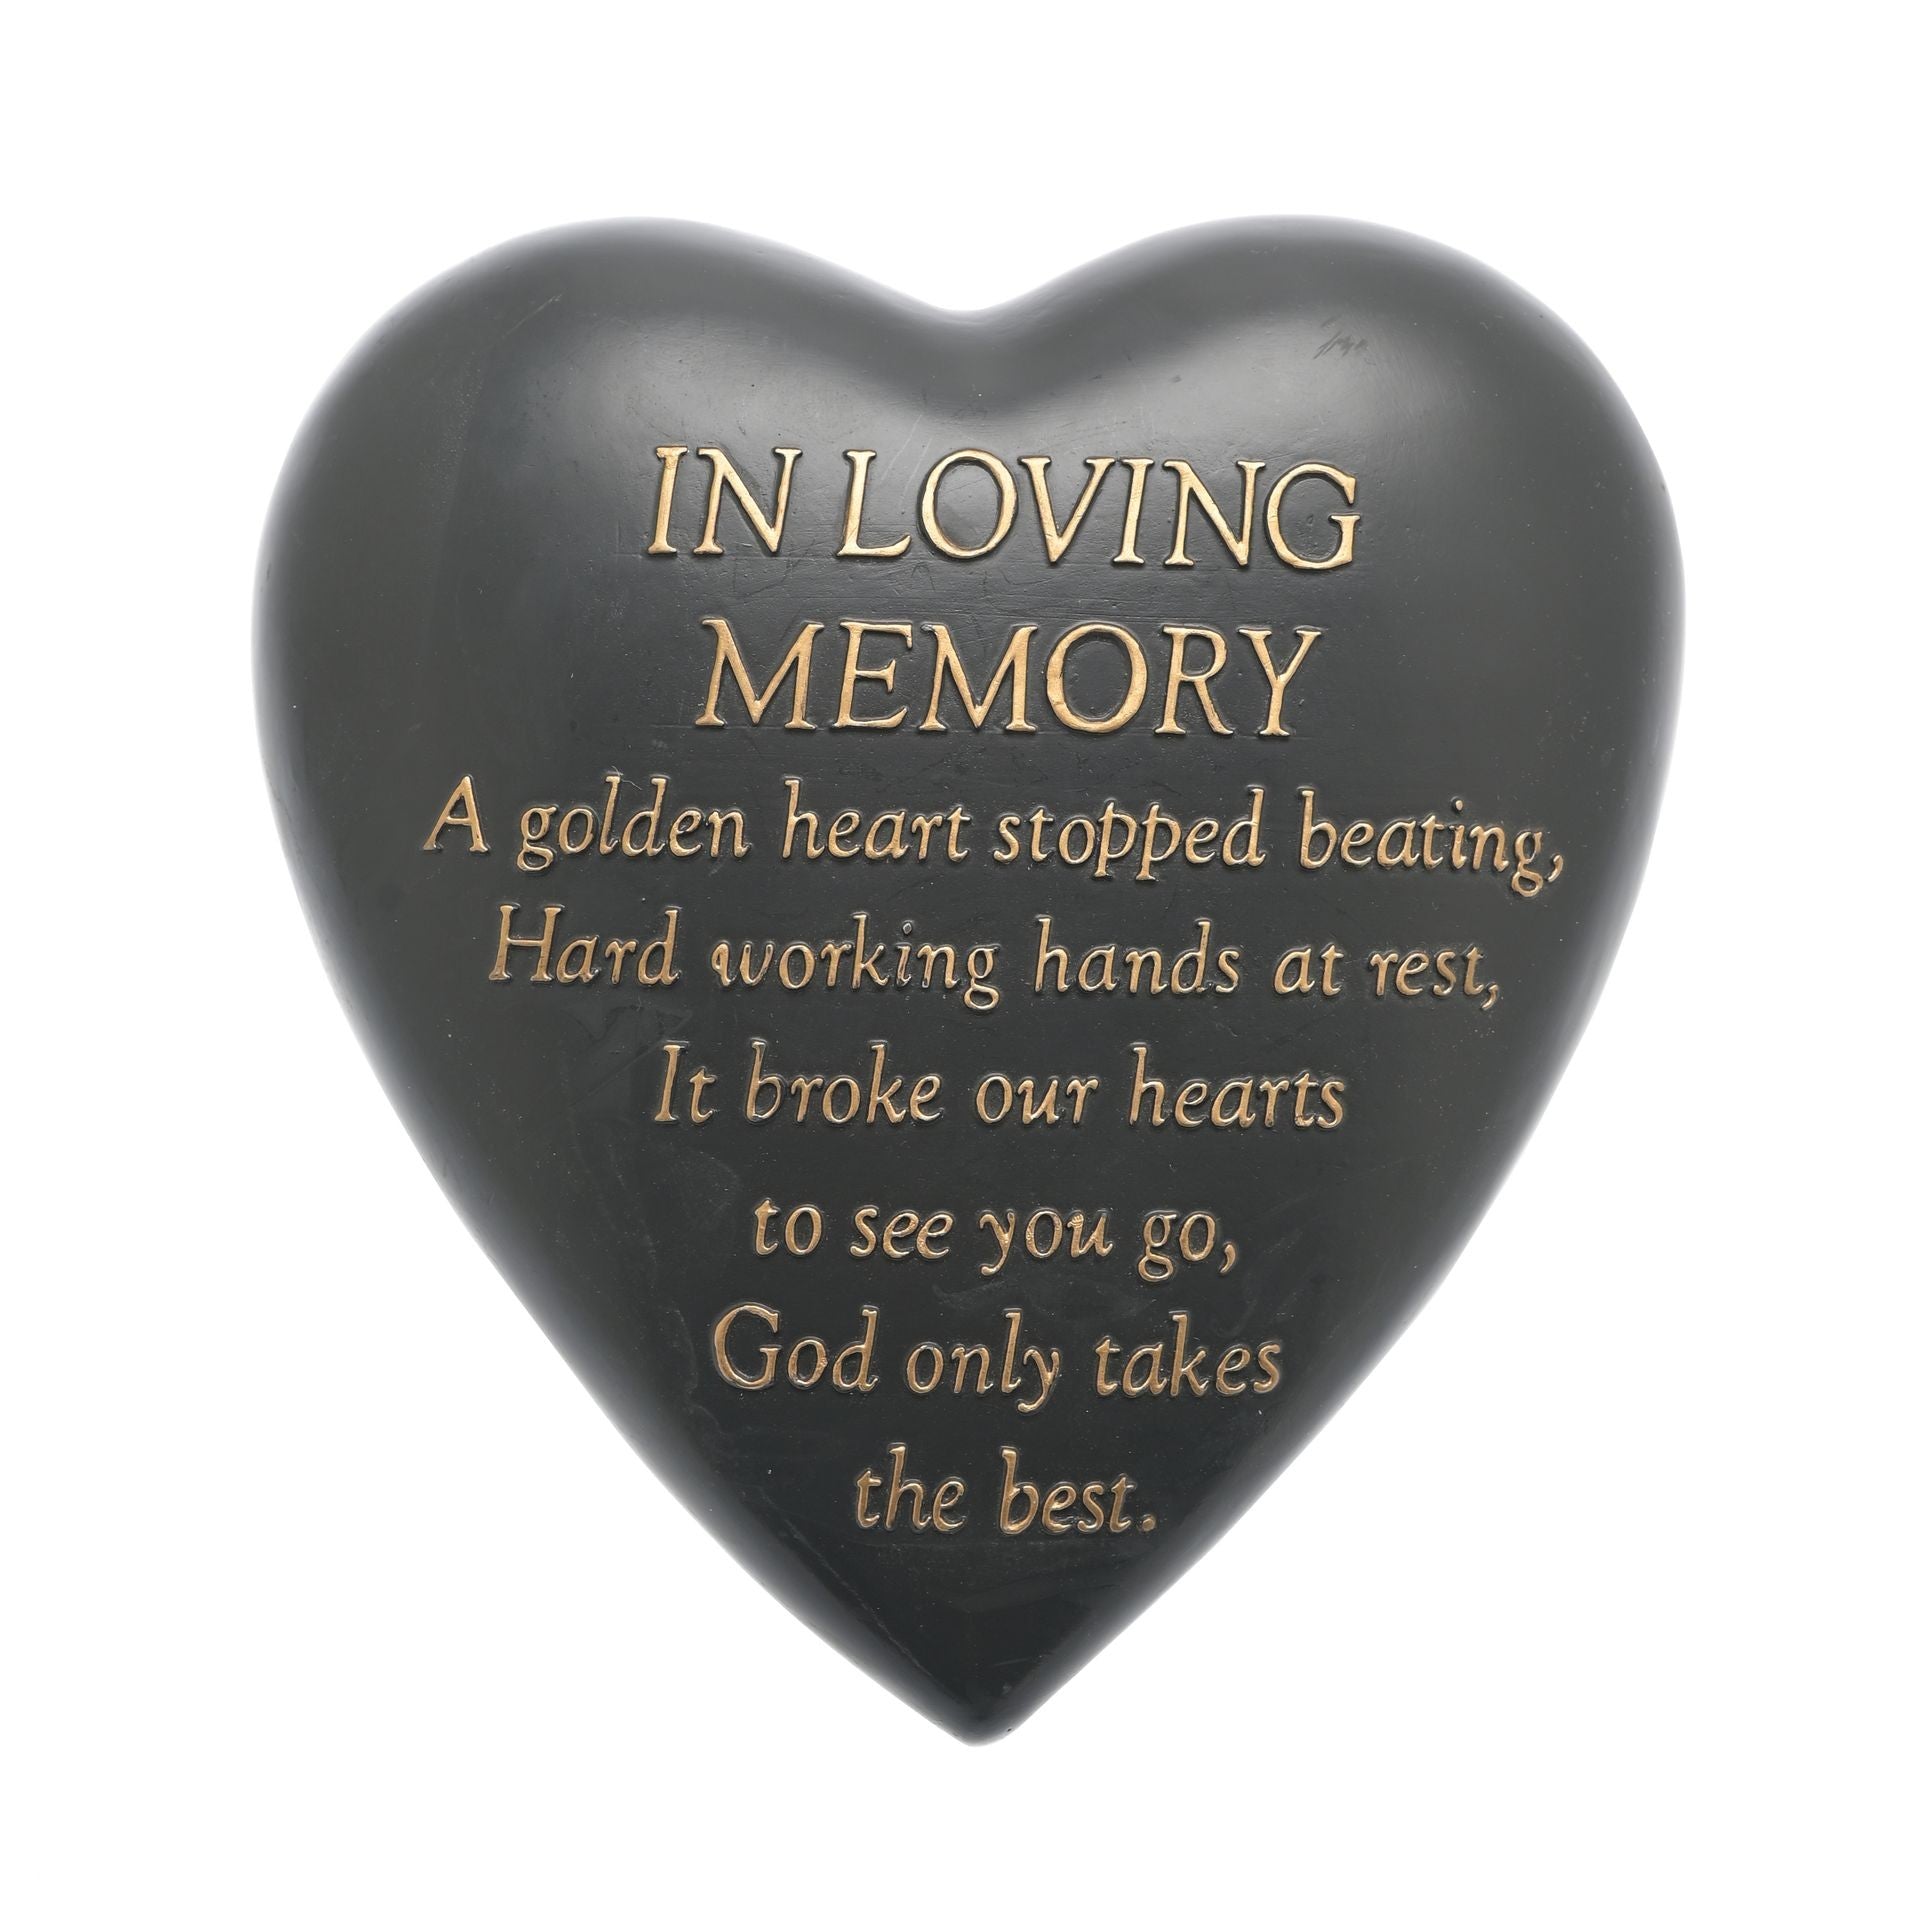 View Graveside Heart Plaque In Loving Memory information